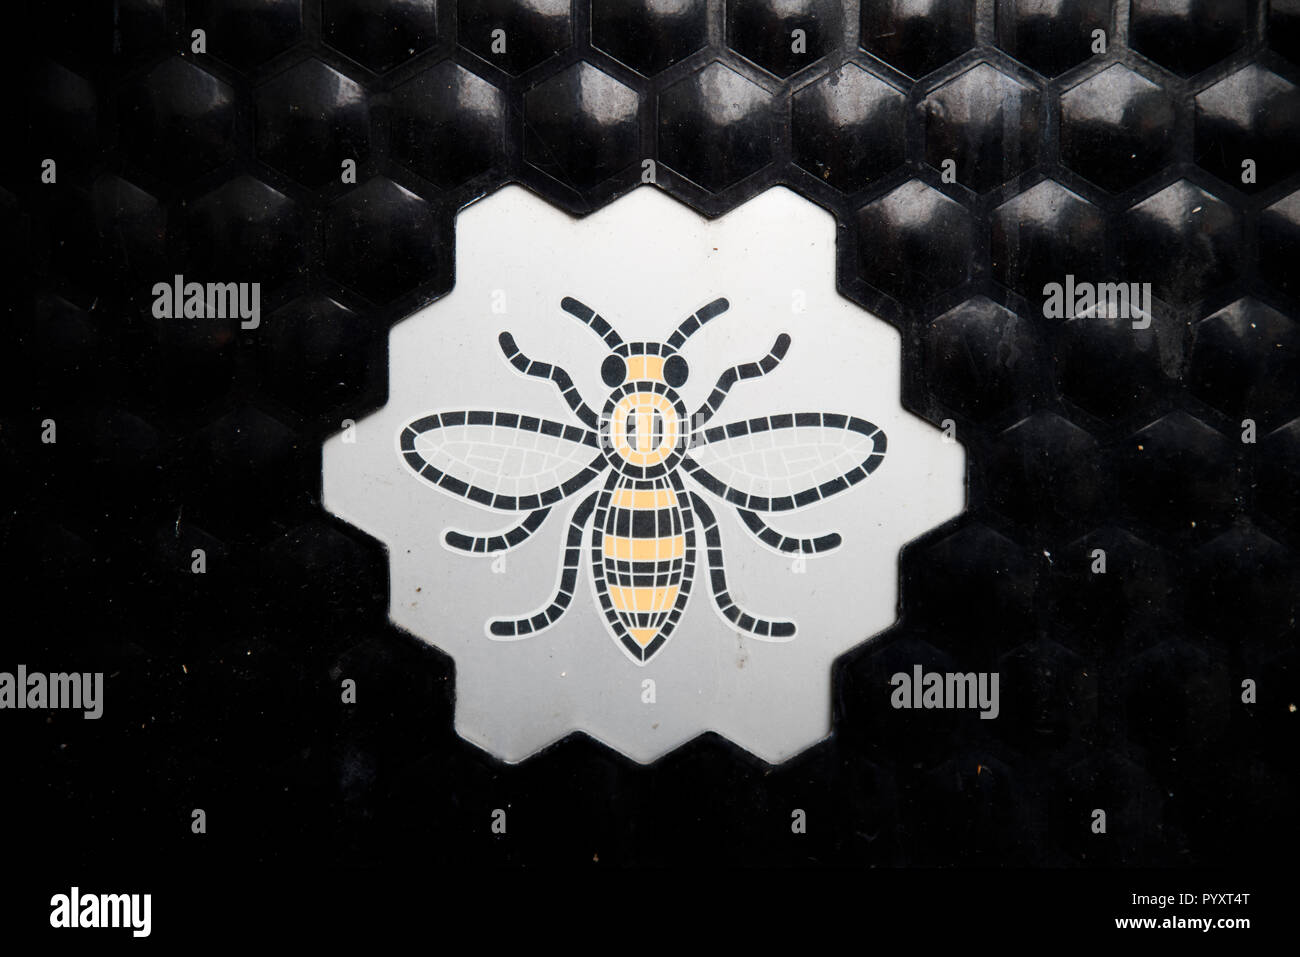 Worker Bee symbol on the side of a Manchester trash can. The bee is a symbol of hard work and resilience against terrorism. Stock Photo